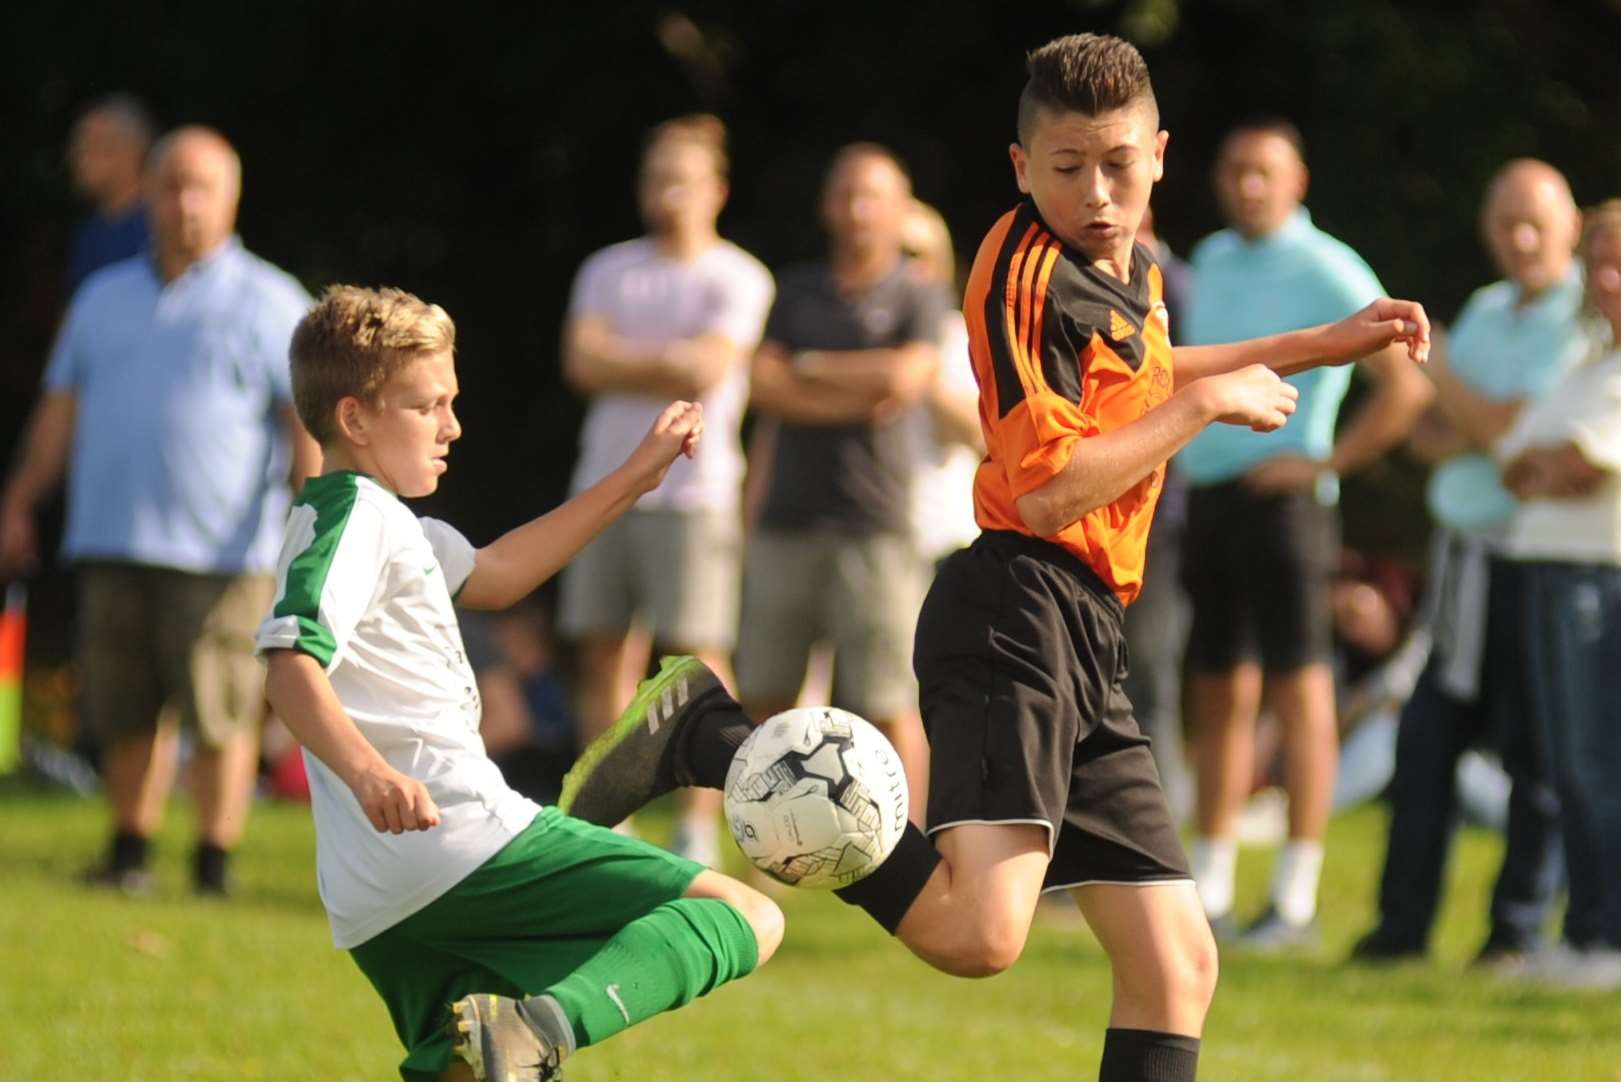 Eagles and Lordswood Youth do battle in Under-15 Division 1 Picture: Steve Crispe